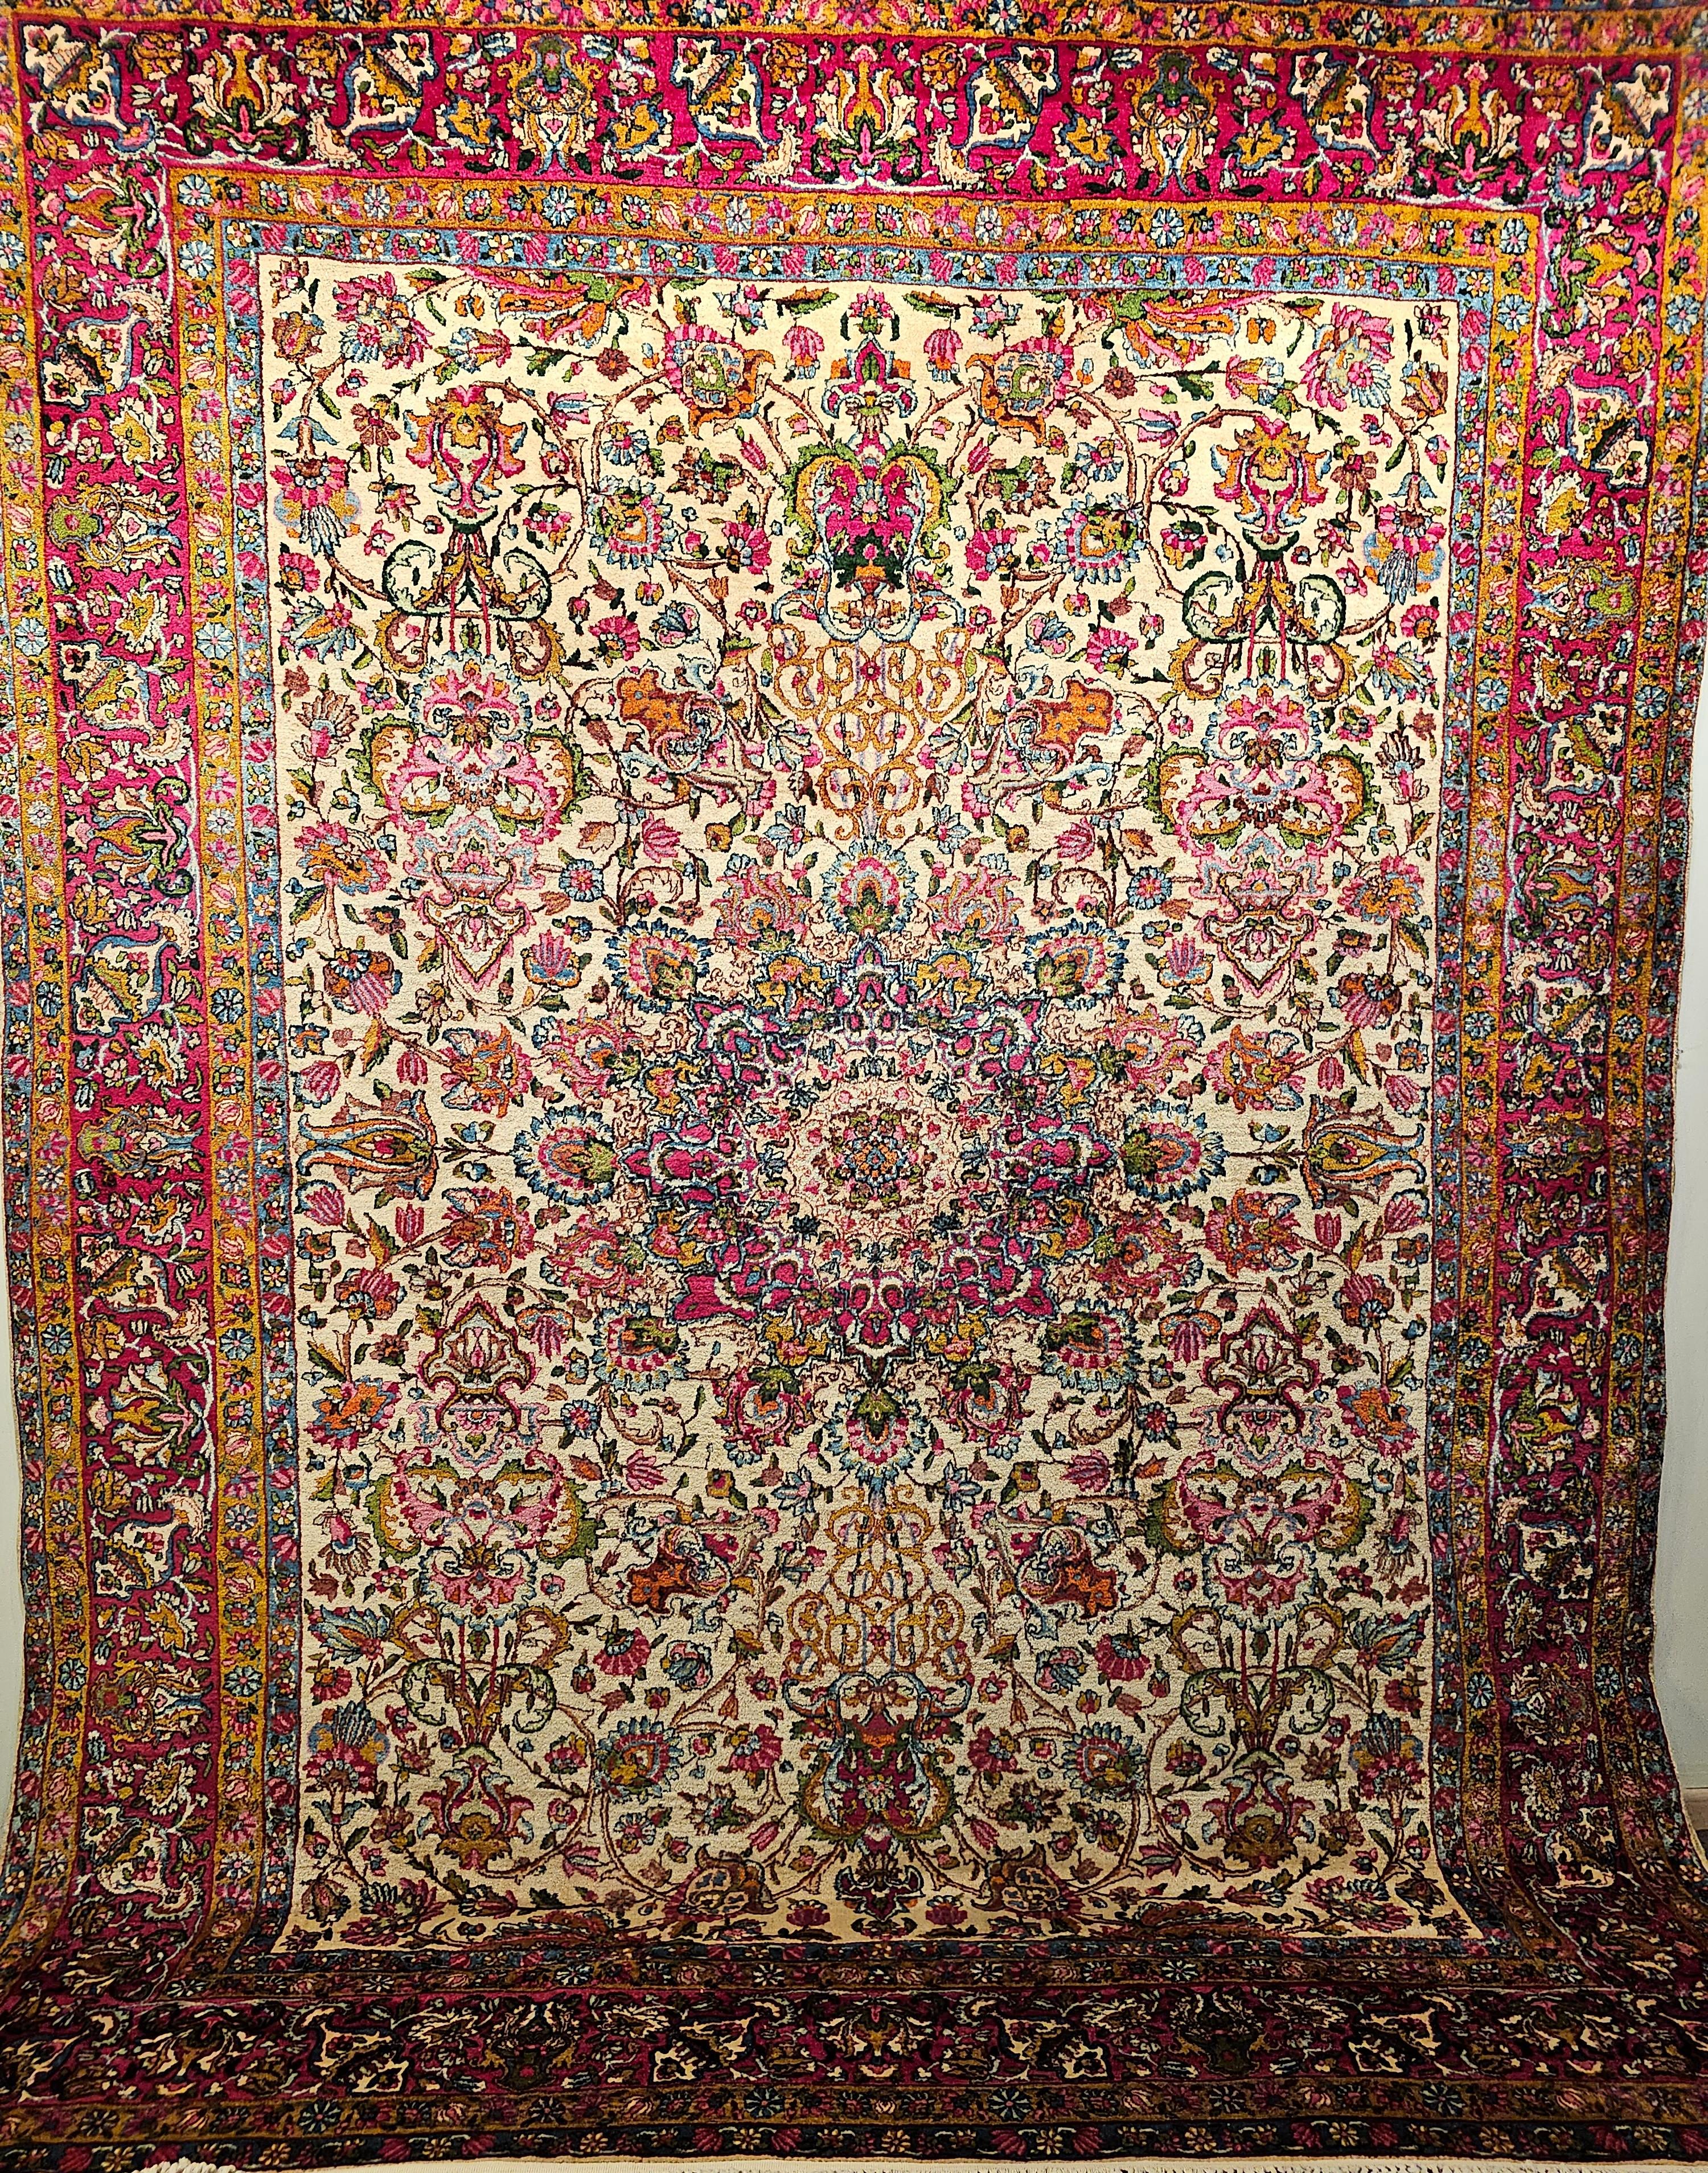 Astonishingly beautiful and colorful Persian Kerman Lavar room size rug in floral design in ivory background with design colors in red, pink, green, blue and many others.  The rug has a gorgeous design and wonderful color combination.  The rug has